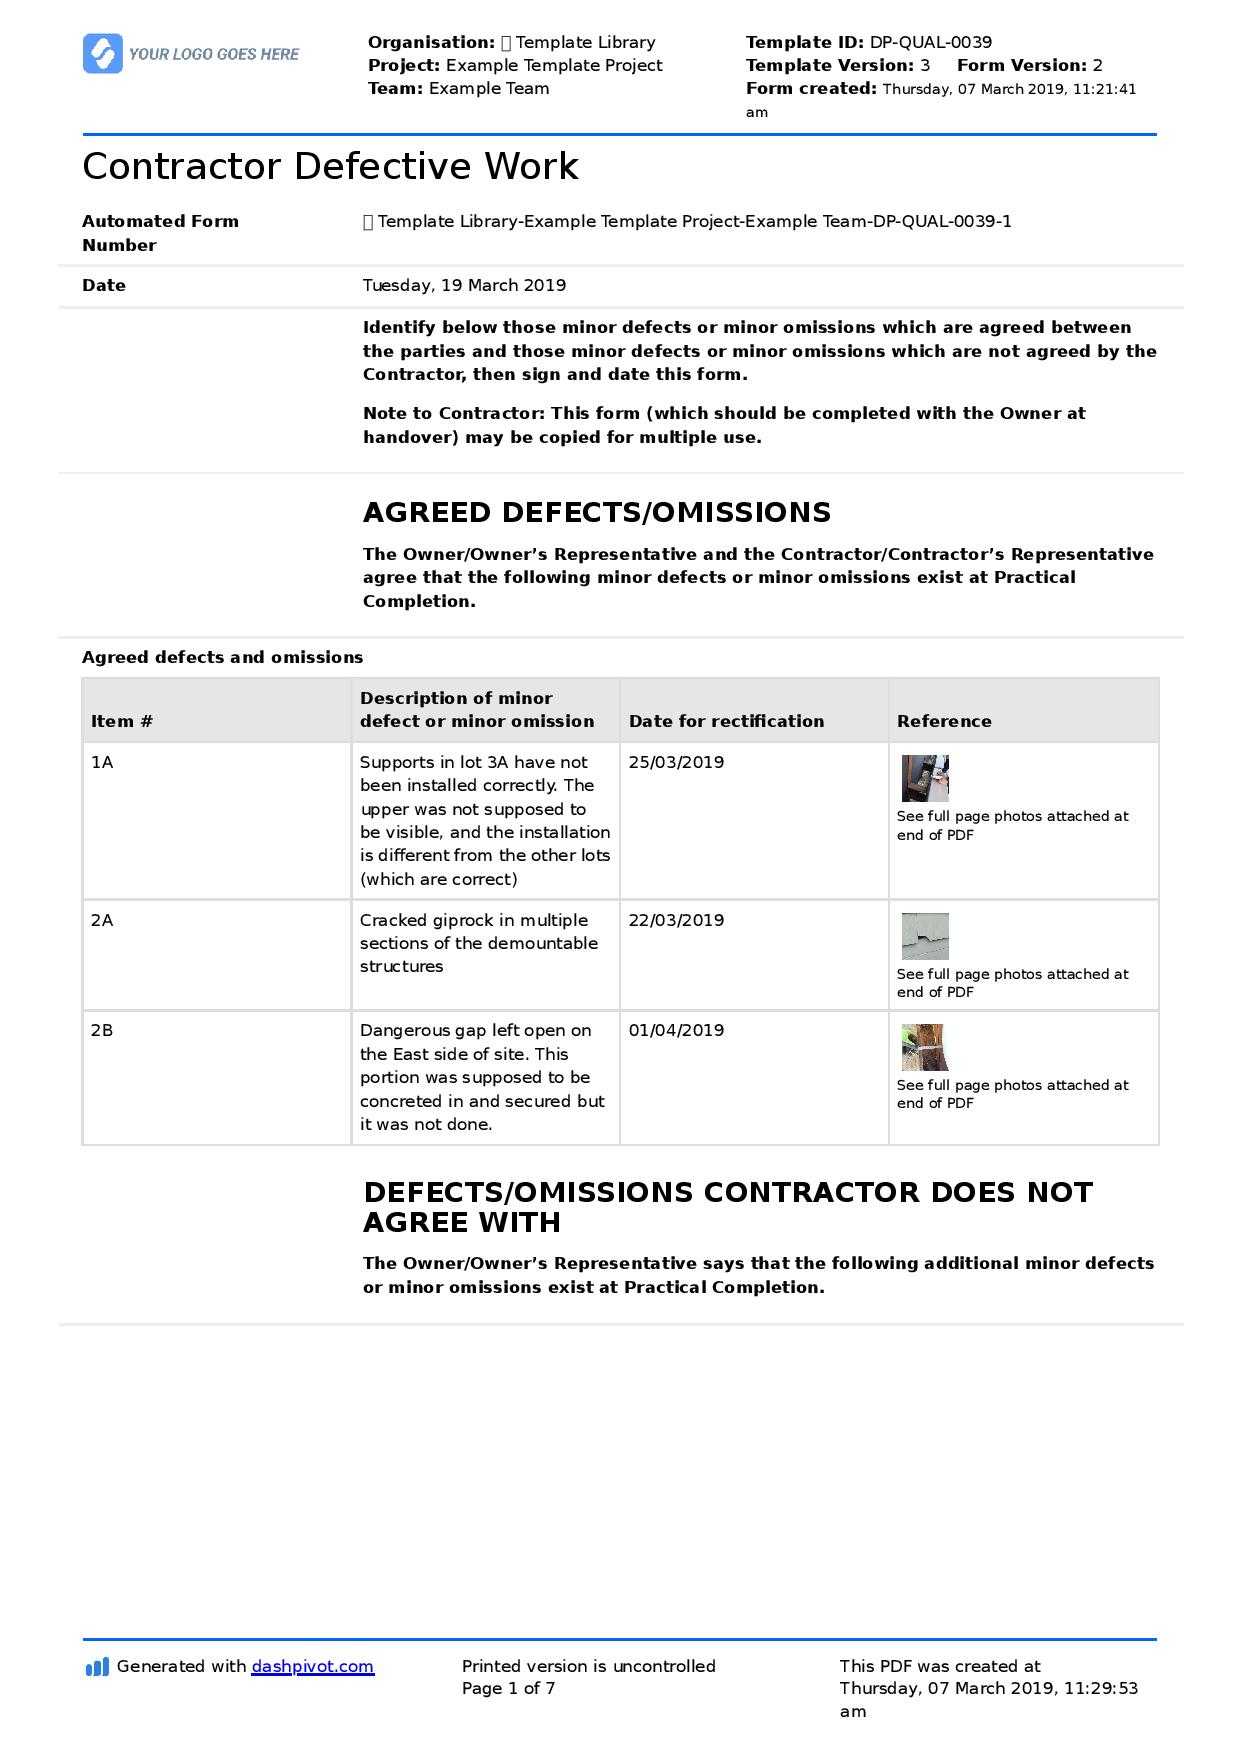 Letter To Contractor For Defective Work: Sample Letter And In Construction Deficiency Report Template